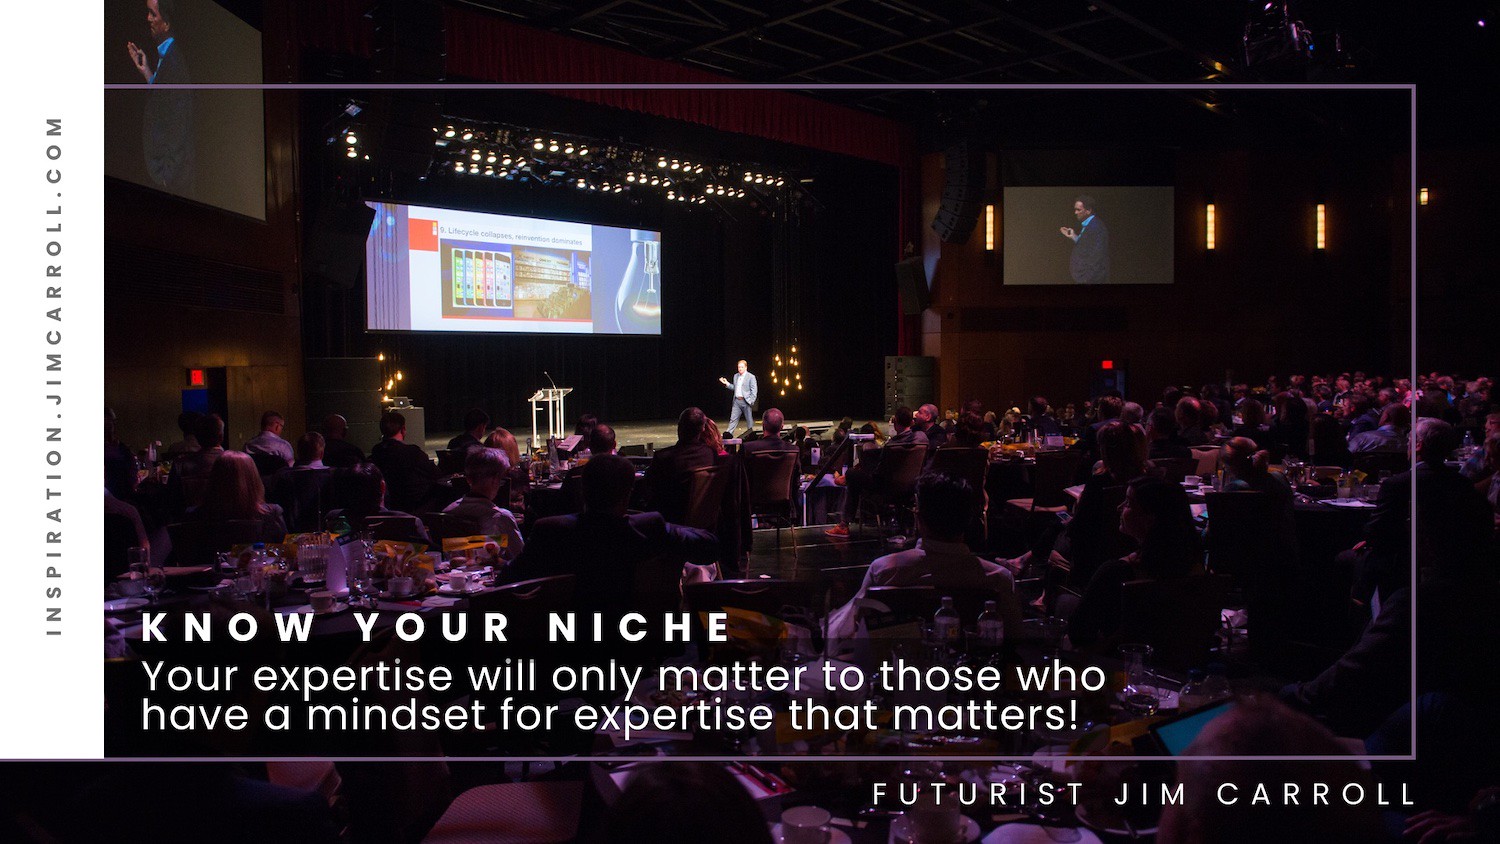 "Know your niche: Your expertise will only matter to those who have a mindset for expertise that matters!" - Futurist Jim Carroll